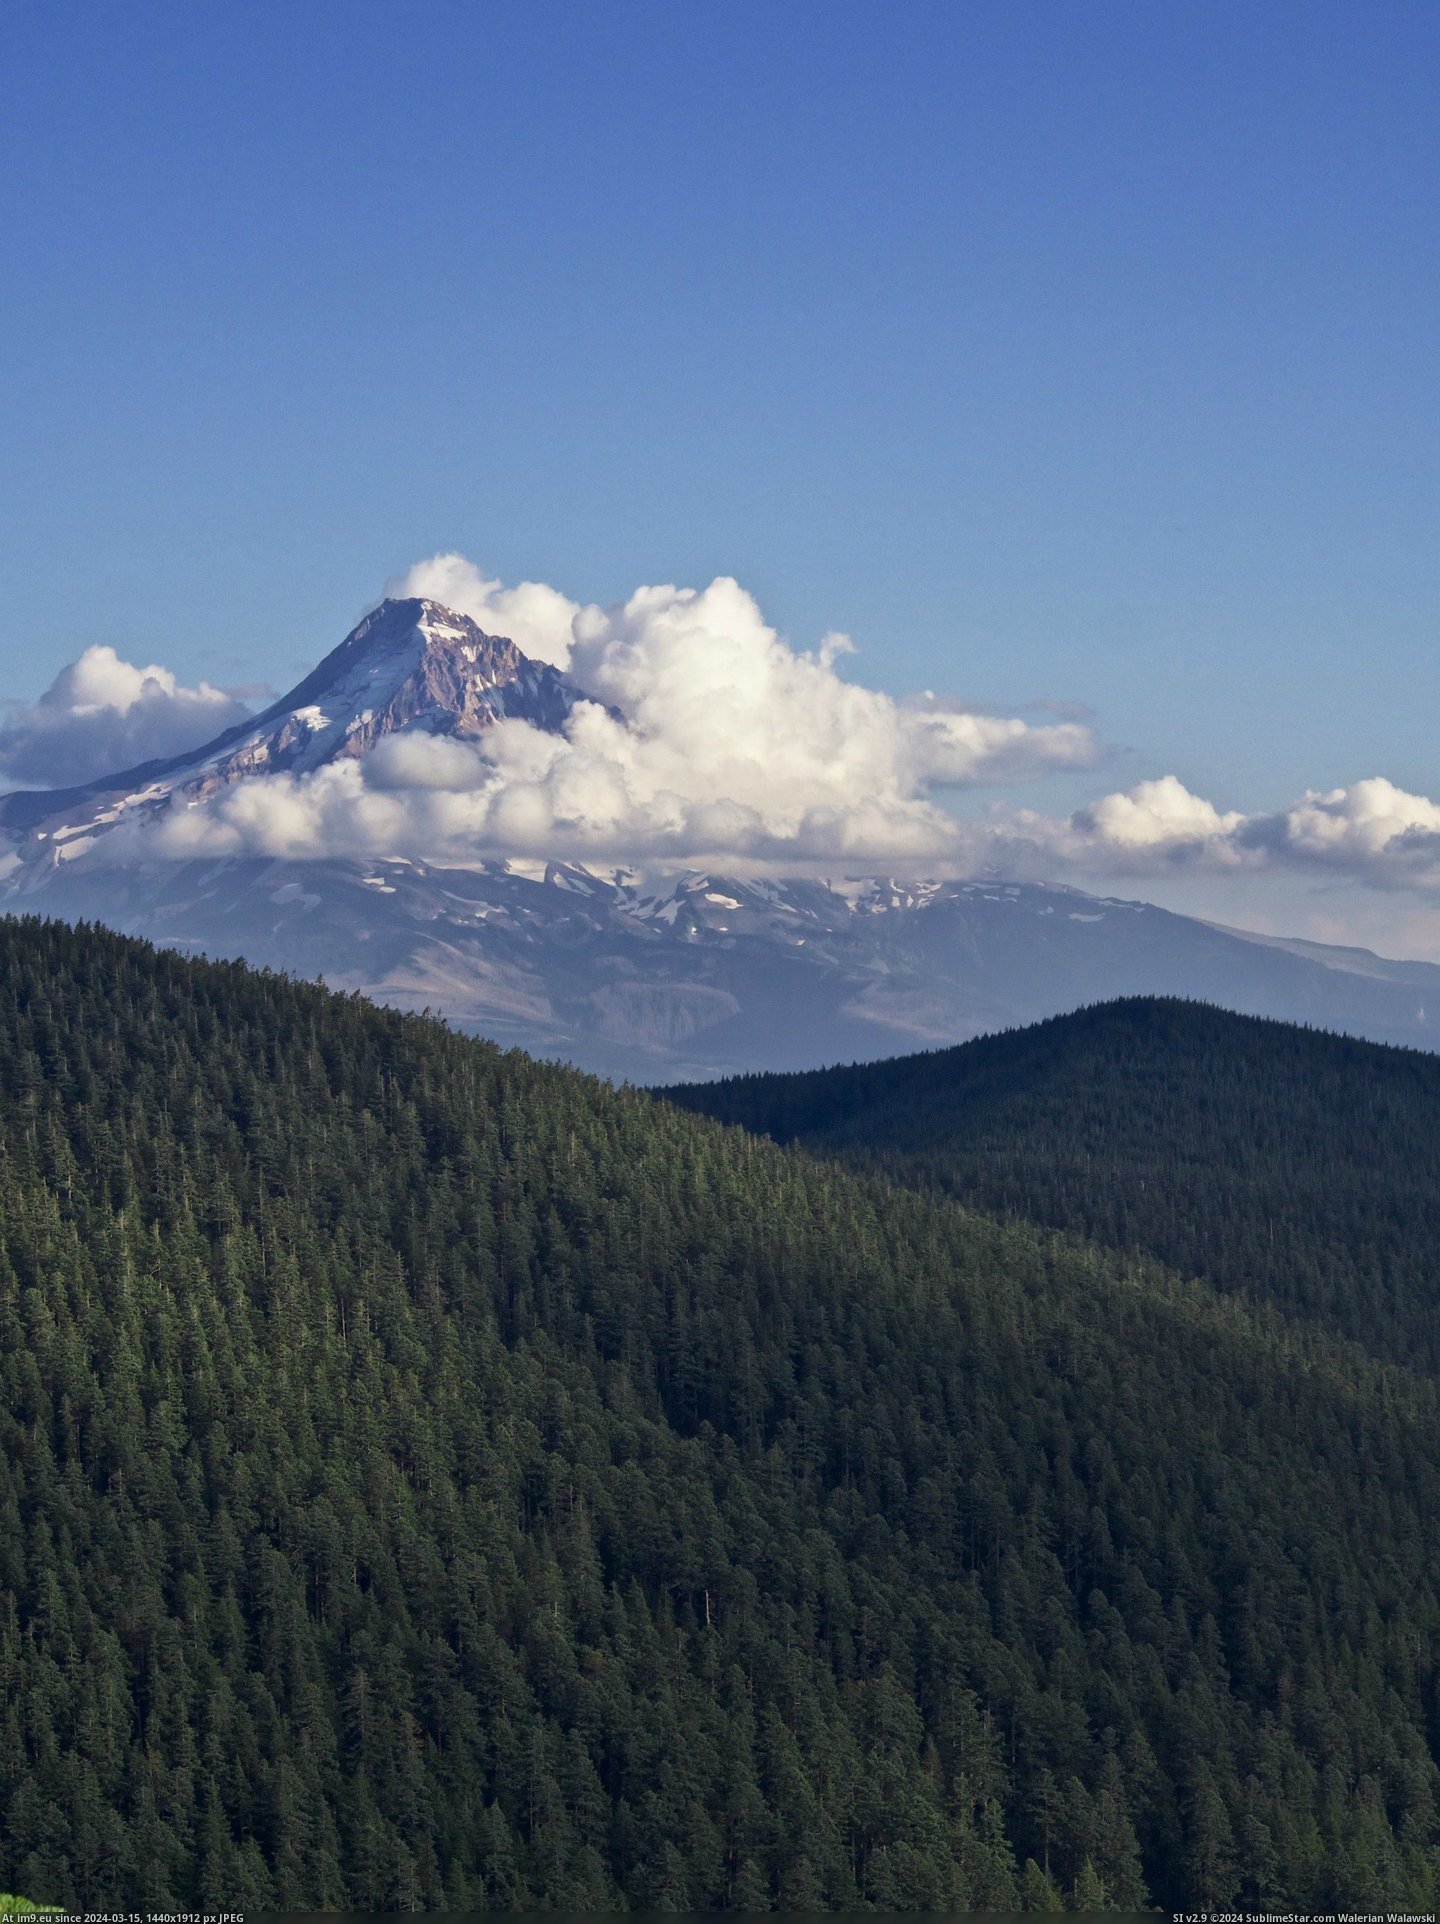 #Beautiful #Lot #Mount #Behold #Contribution #Oregon #Proud #Hood [Earthporn] Proud to see a lot of Oregon in EarthPorn lately. Here is my contribution. Behold beautiful Mount Hood as seen from  Pic. (Изображение из альбом My r/EARTHPORN favs))